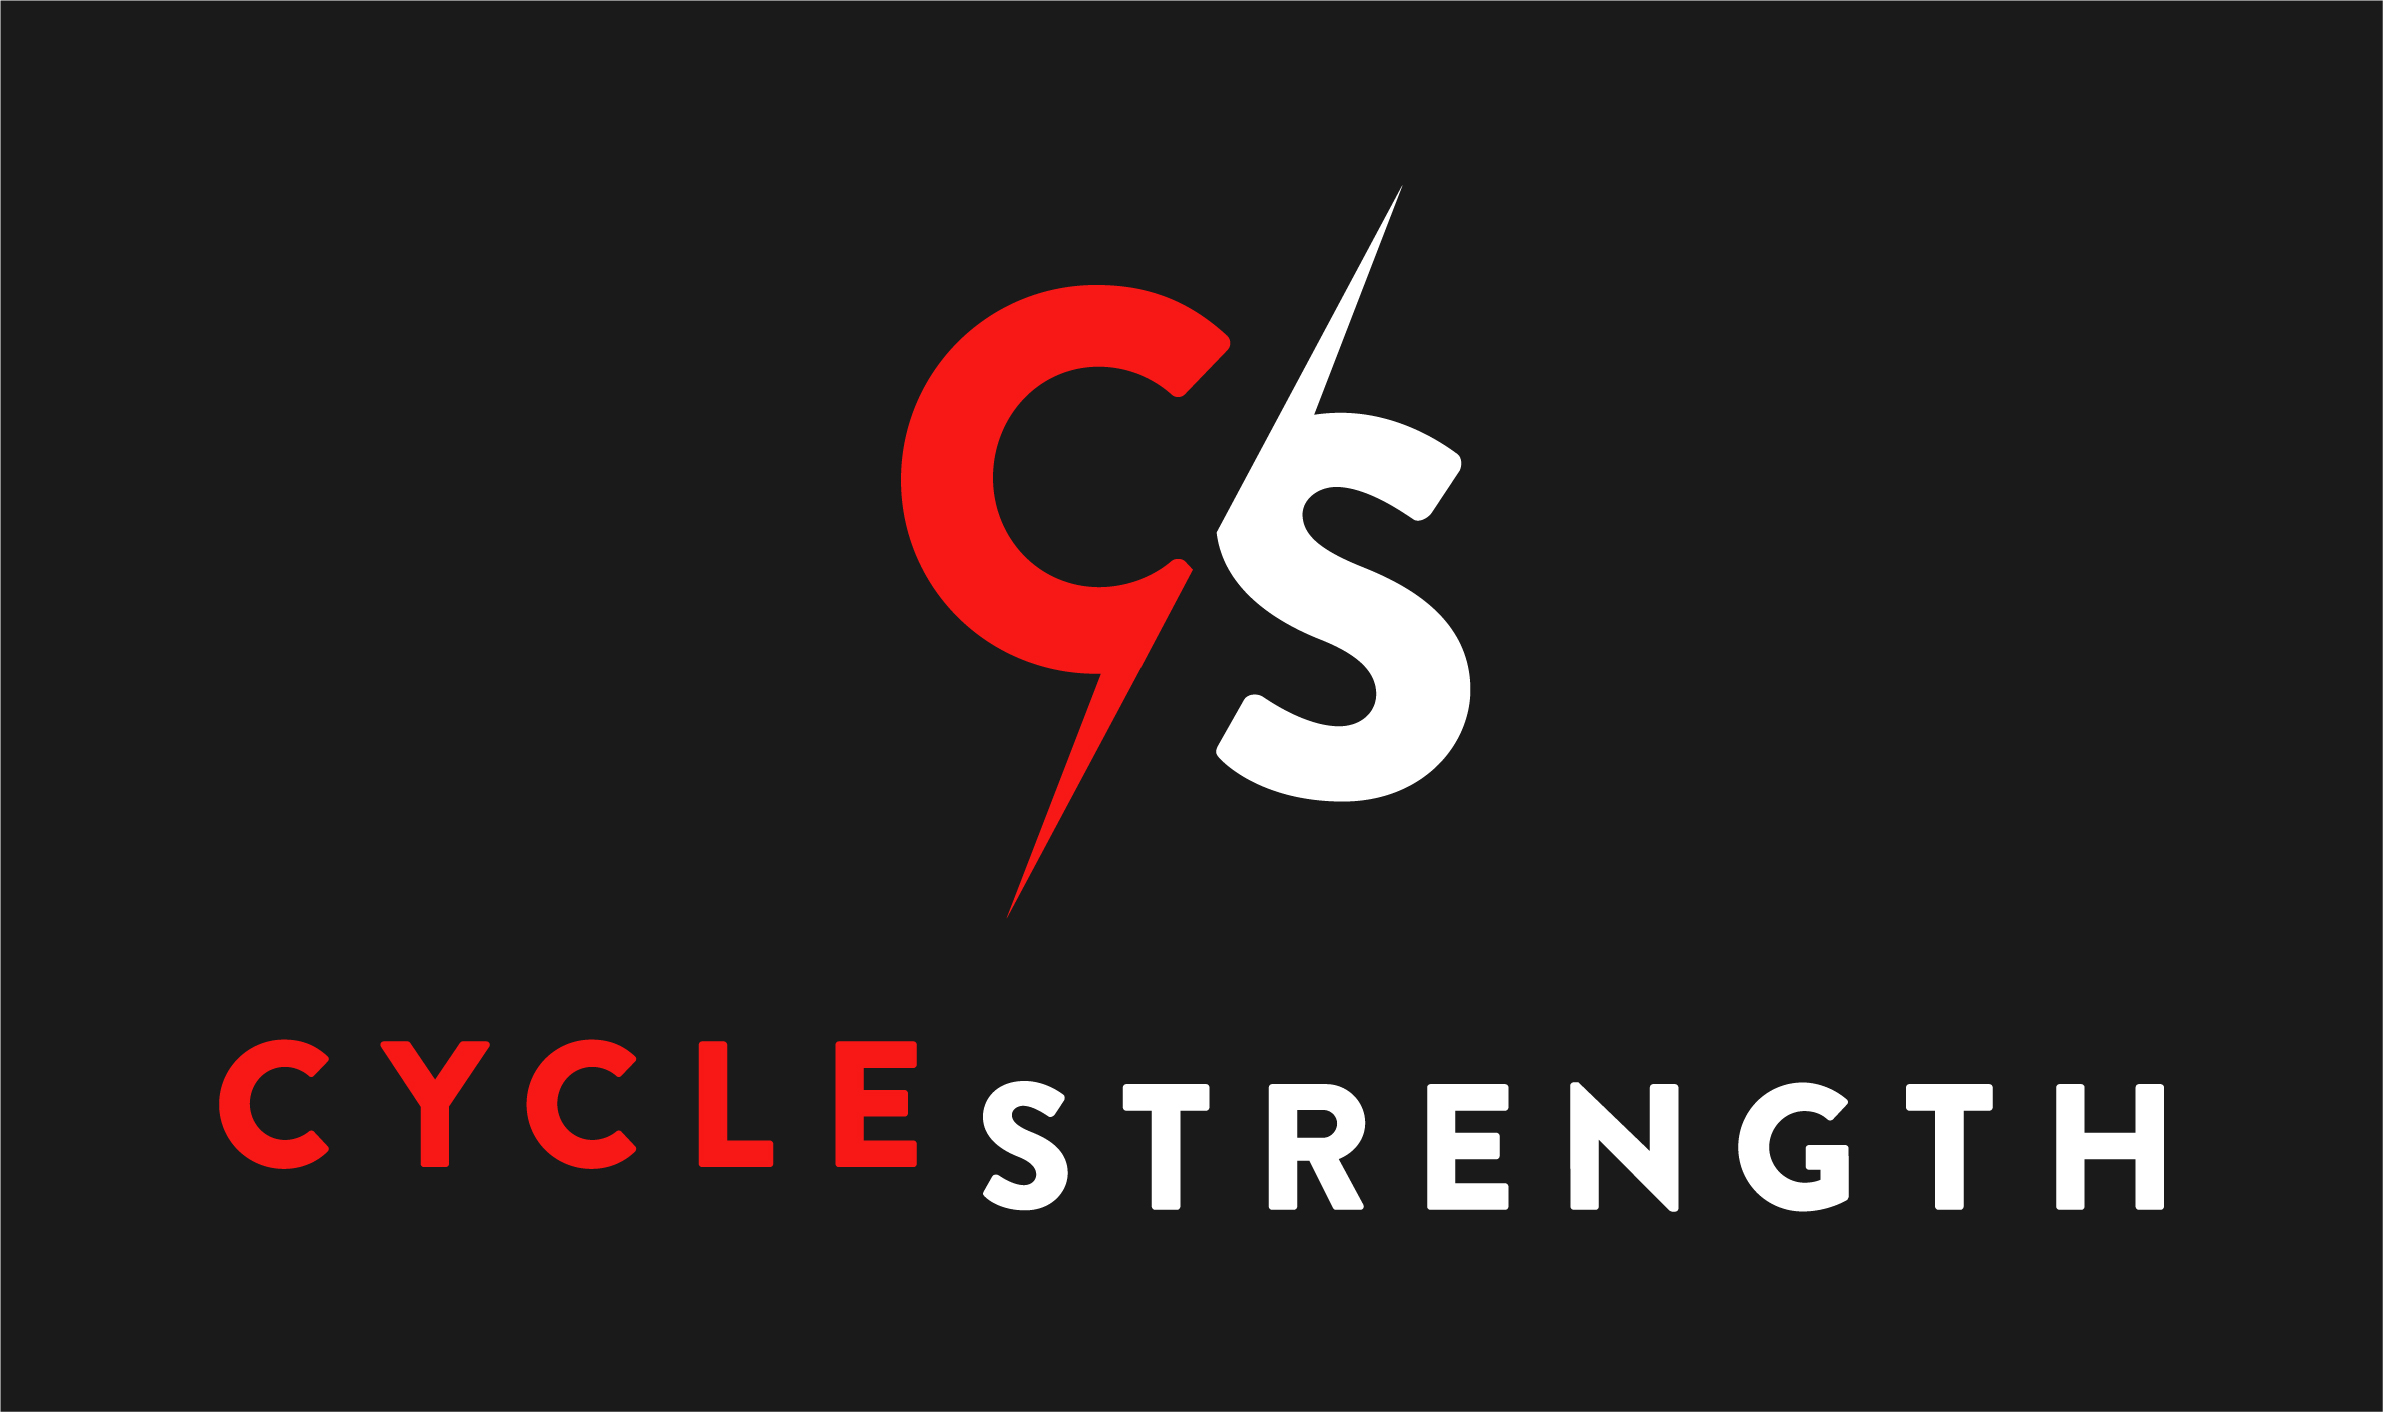 Cycle Strength Personal Training Team Jersey